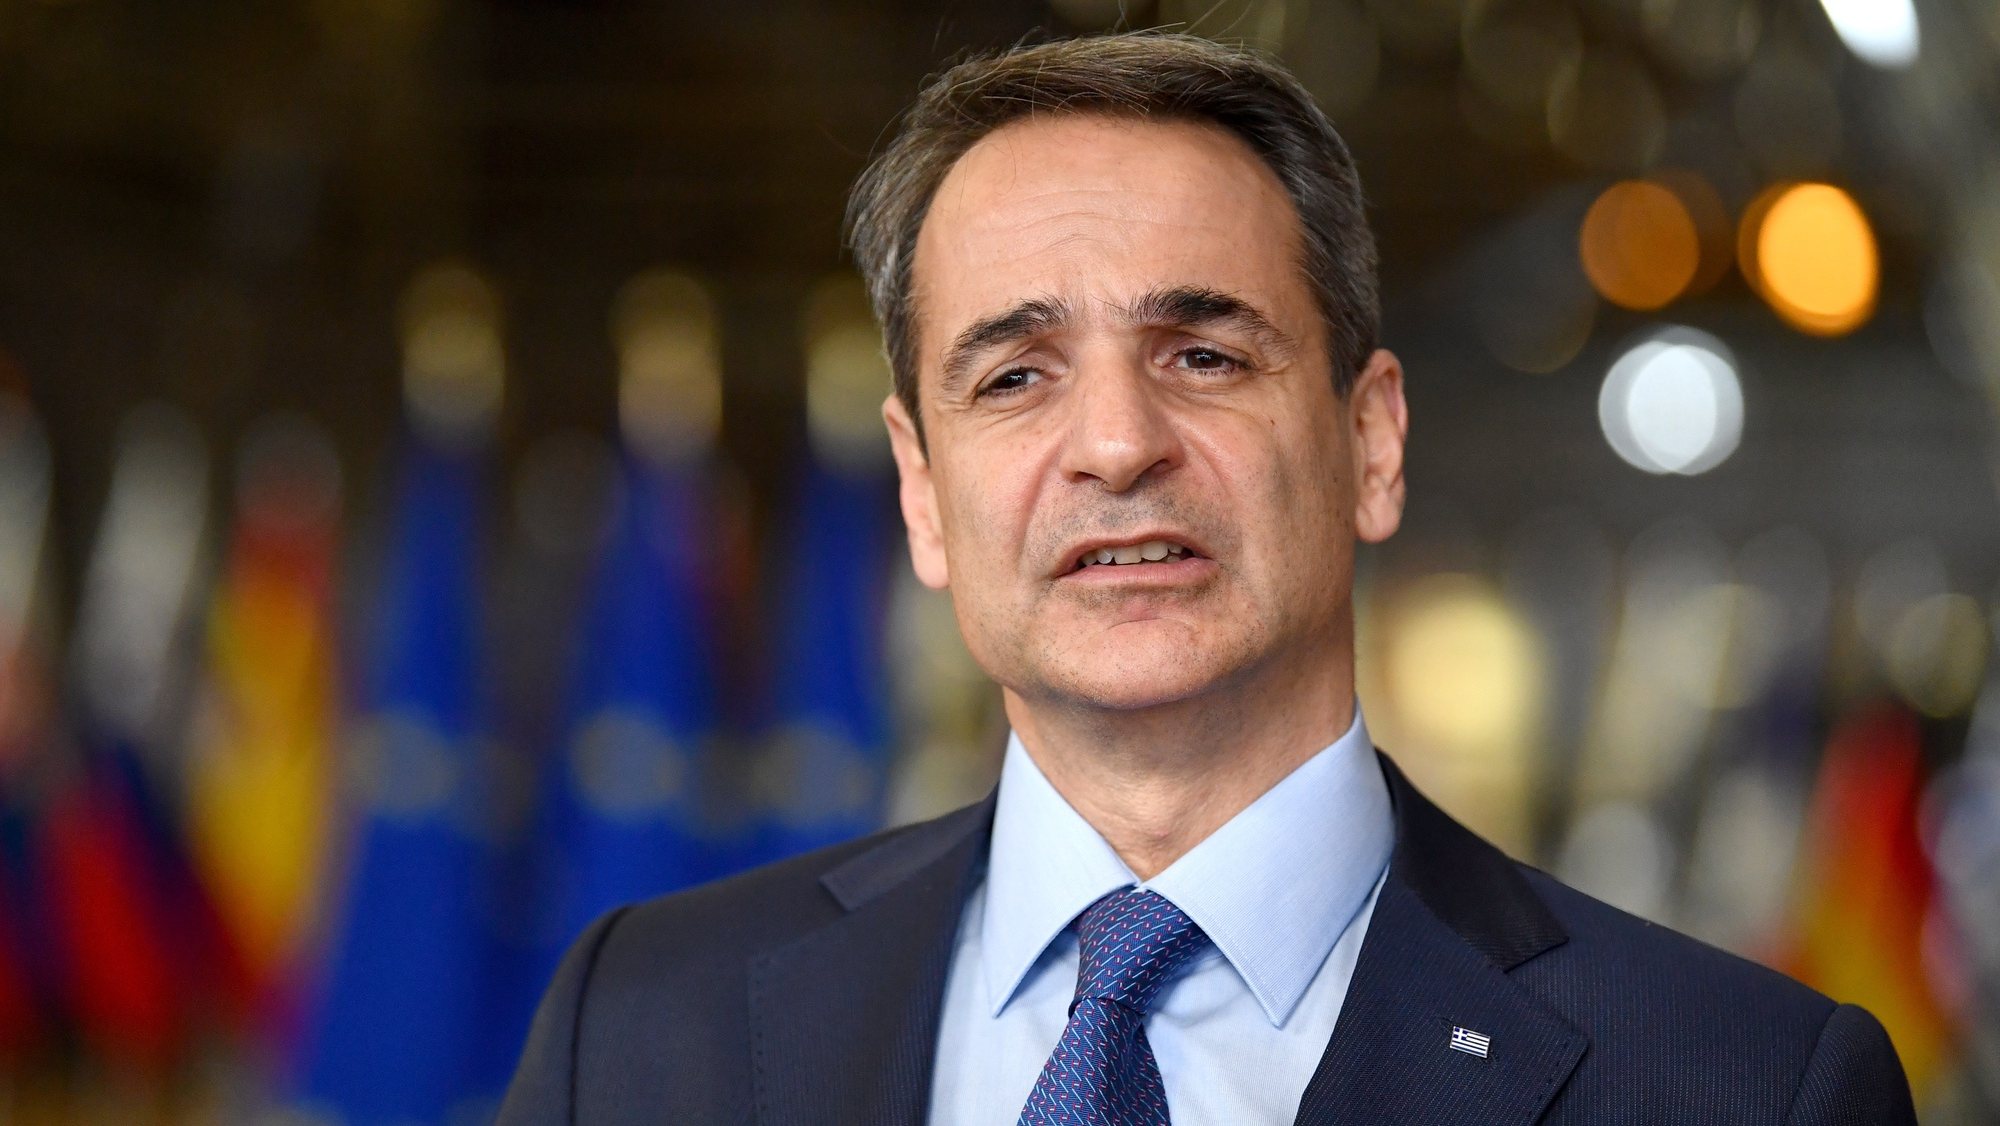 epa09781760 Greece&#039;s Prime Minister Kyriakos Mitsotakis arrives for an emergency European Union (EU) summit on the situation in Ukraine at the European Council building in Brussels, Belgium, 24 February 2022. A special meeting of the European Council was urgently convened to discuss the situation in Ukraine. Ahead of the summit, EU leaders issued a joint statement in which they &#039;condemn in the strongest possible terms Russia&#039;s unprecedented military aggression against Ukraine.&#039;  EPA/JOHN THYS / POOL